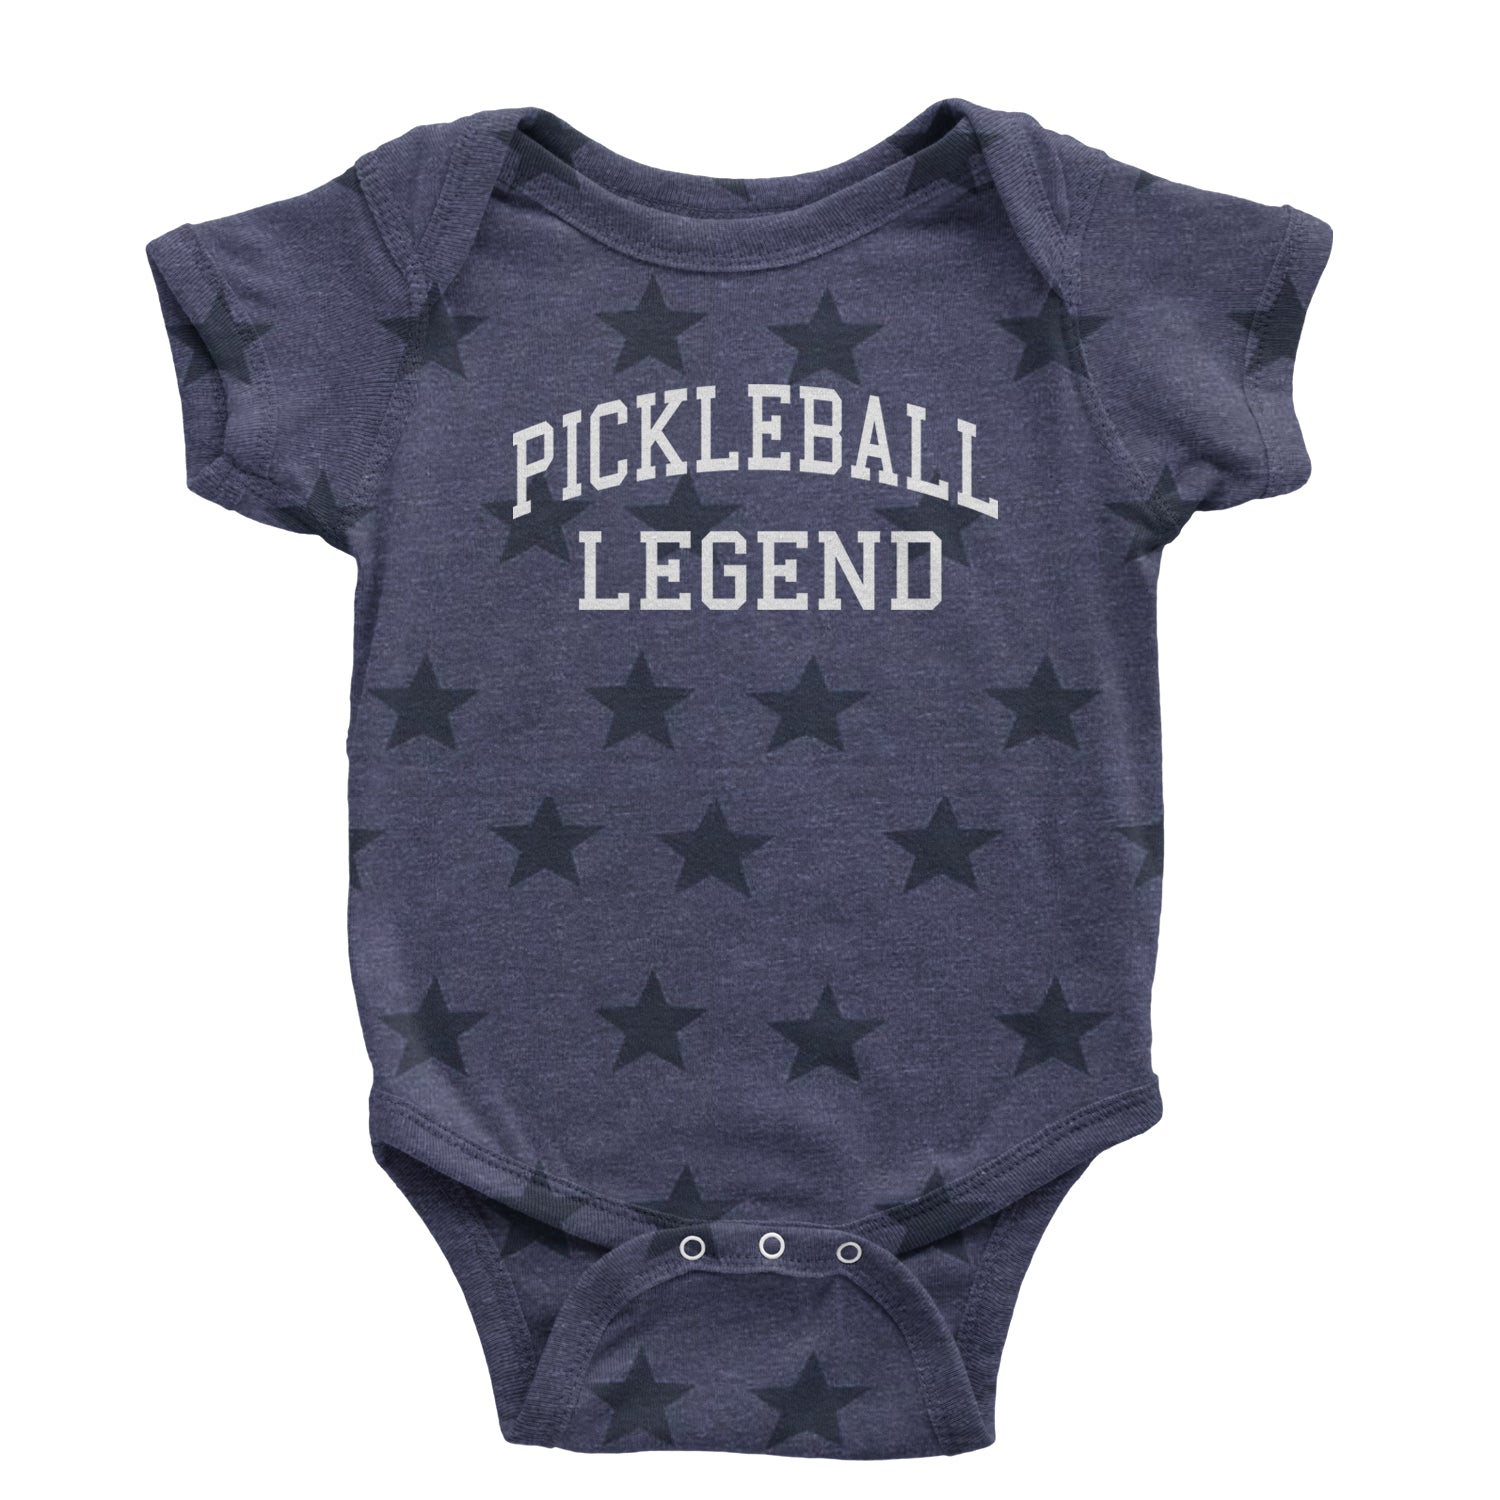 Pickleball Legend Infant One-Piece Romper Bodysuit and Toddler T-shirt ball, dink, dinking, pickle, pickleball by Expression Tees